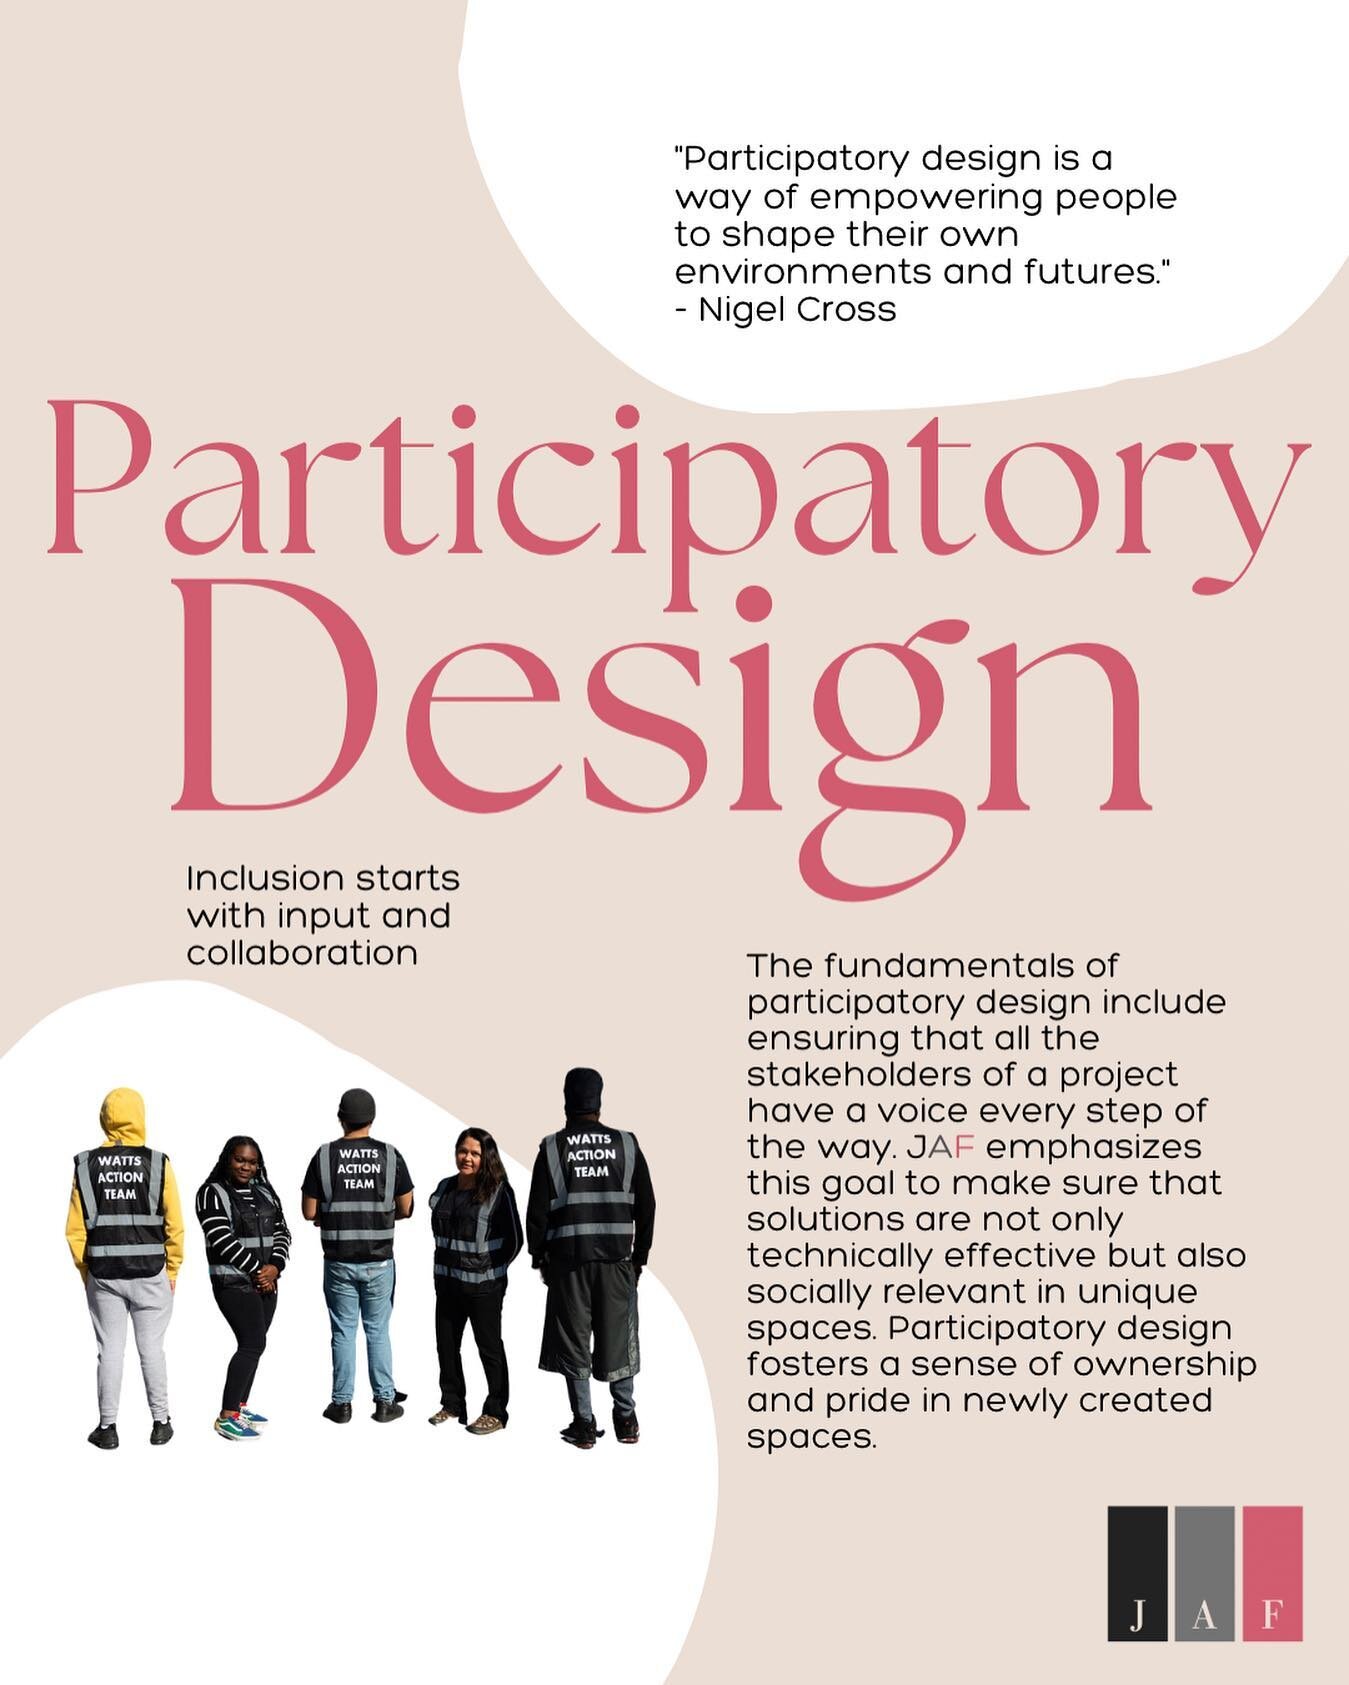 Participatory design &ndash; one of the fundamental principles of JAF. This idea has a role in all of our services and leads us in our projects. Dive into our latest post to learn more about how we embrace inclusivity and collaboration in everything 